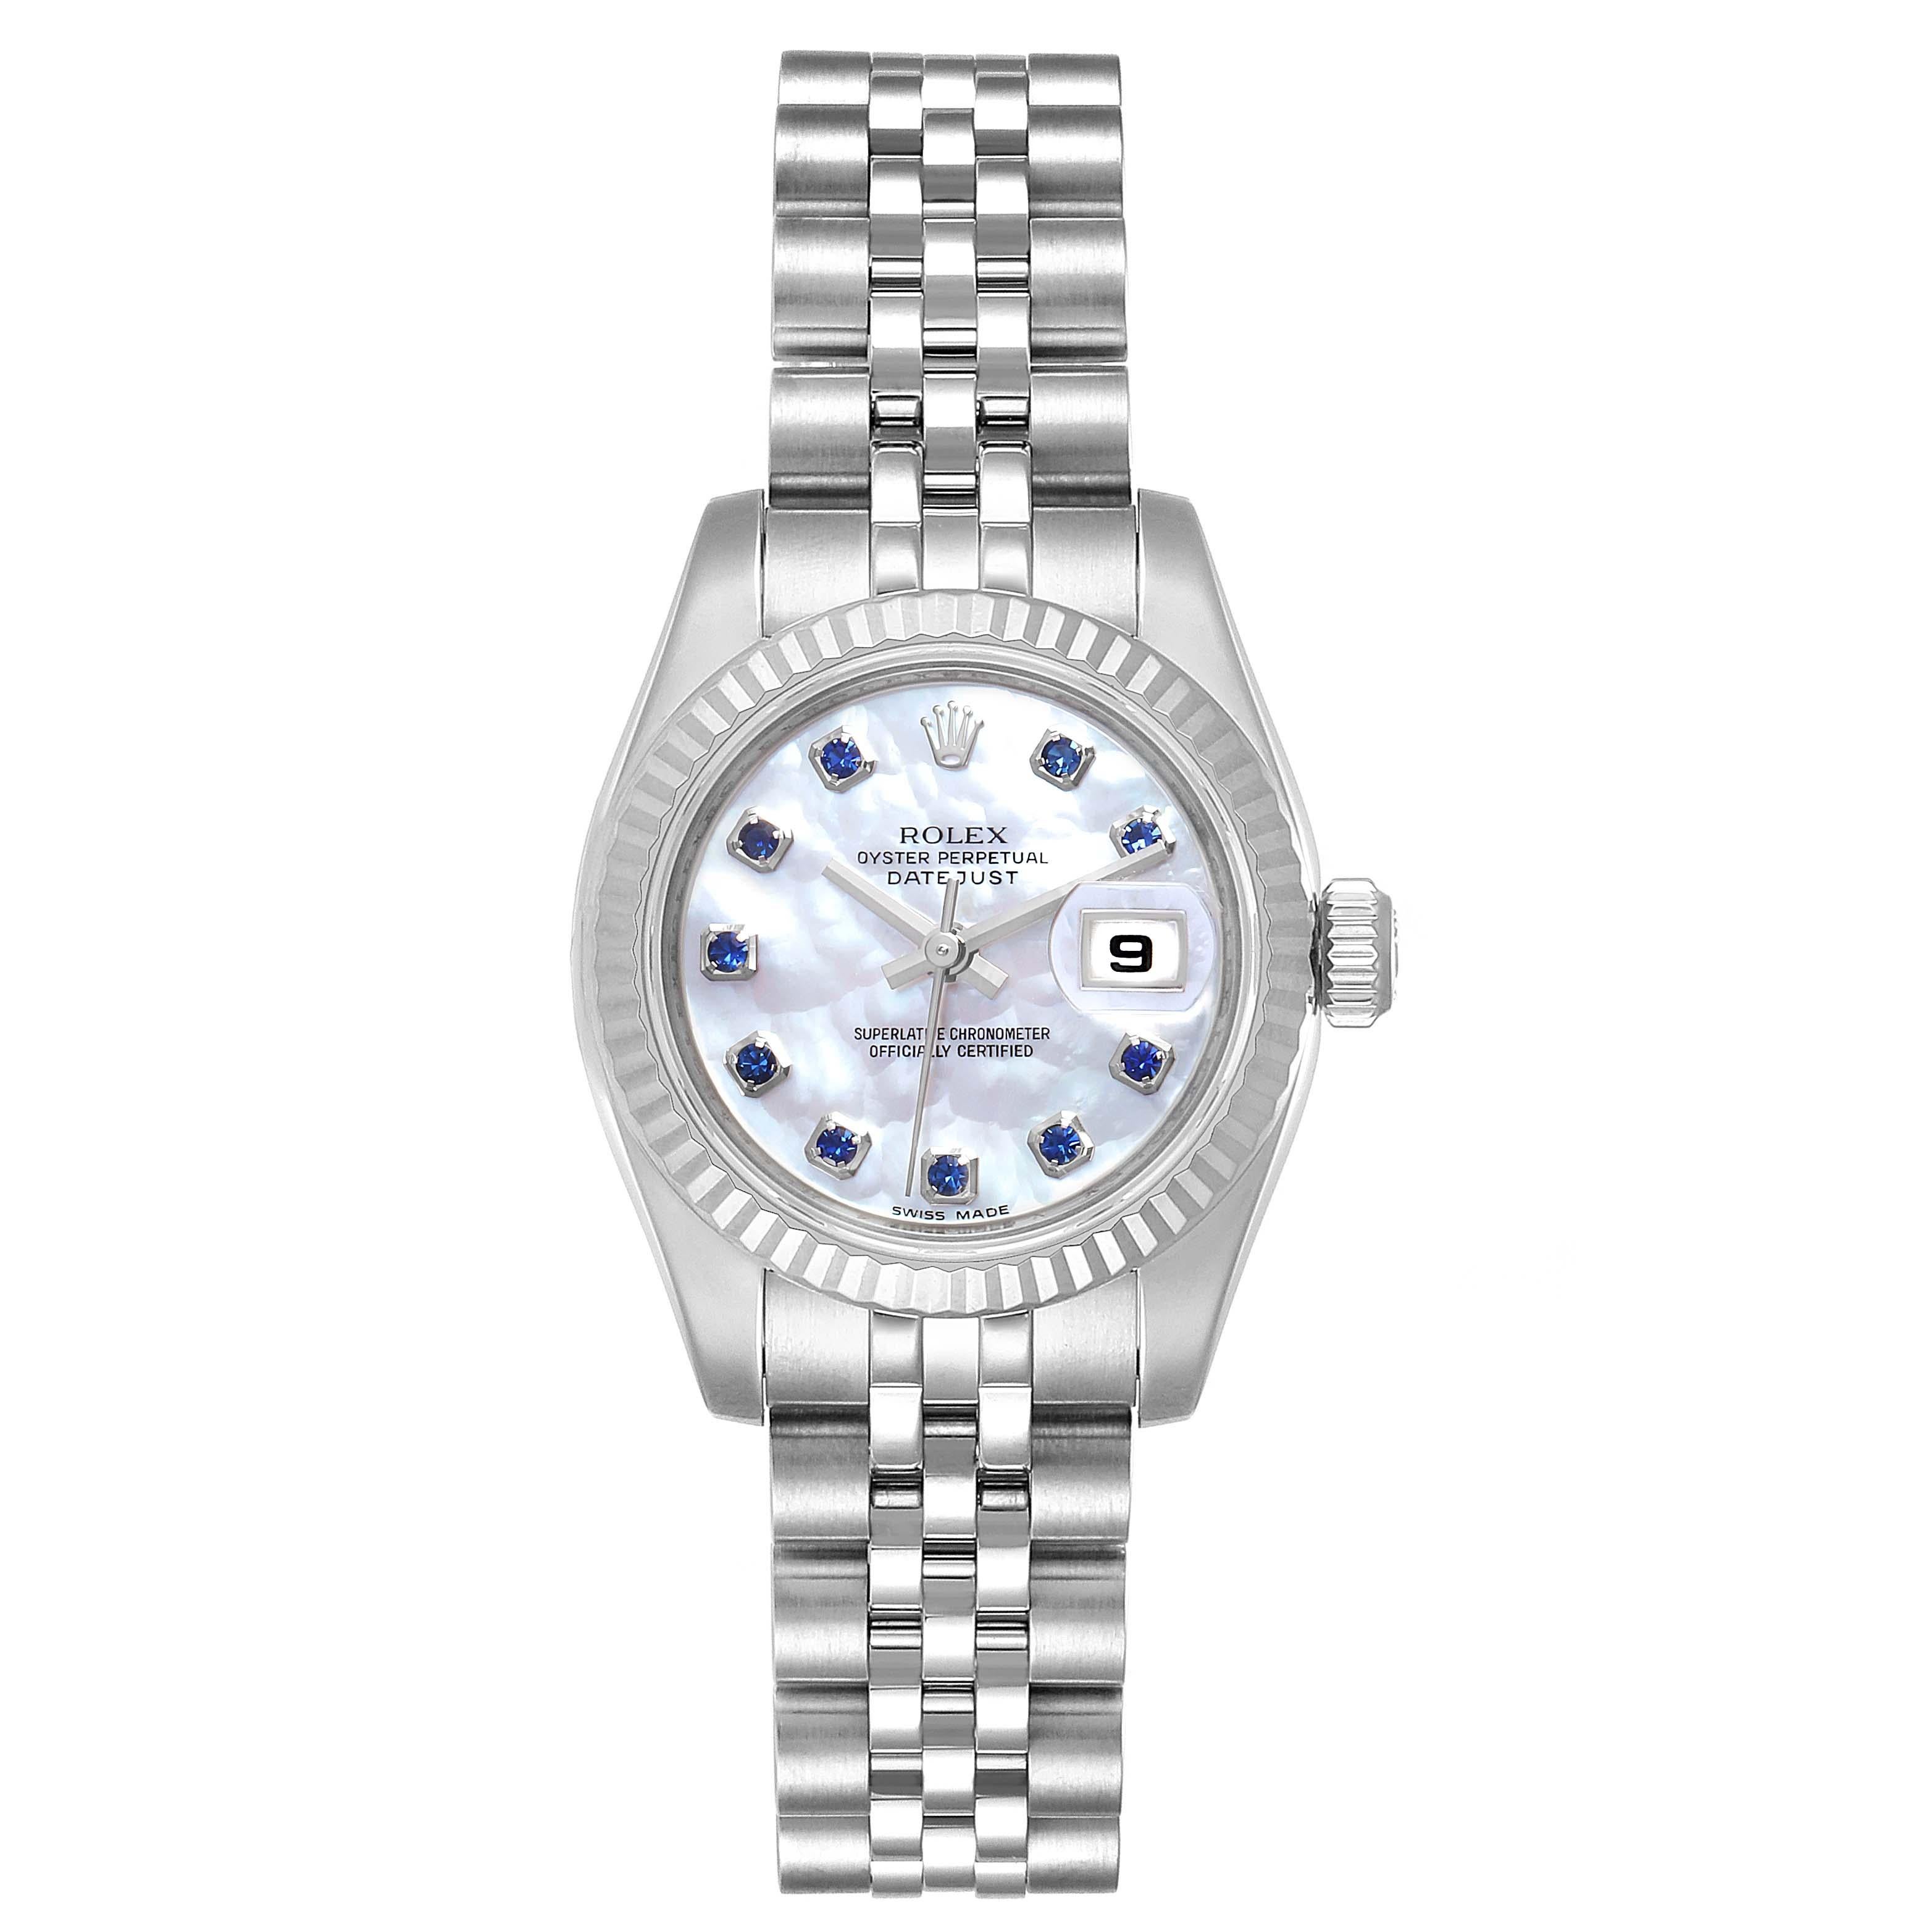 Rolex Datejust Steel White Gold MOP Saphire Ladies Watch 179174 Box Card. Officially certified chronometer self-winding movement. Stainless steel oyster case 26.0 mm in diameter. Rolex logo on a crown. 18K white gold fluted bezel. Scratch resistant